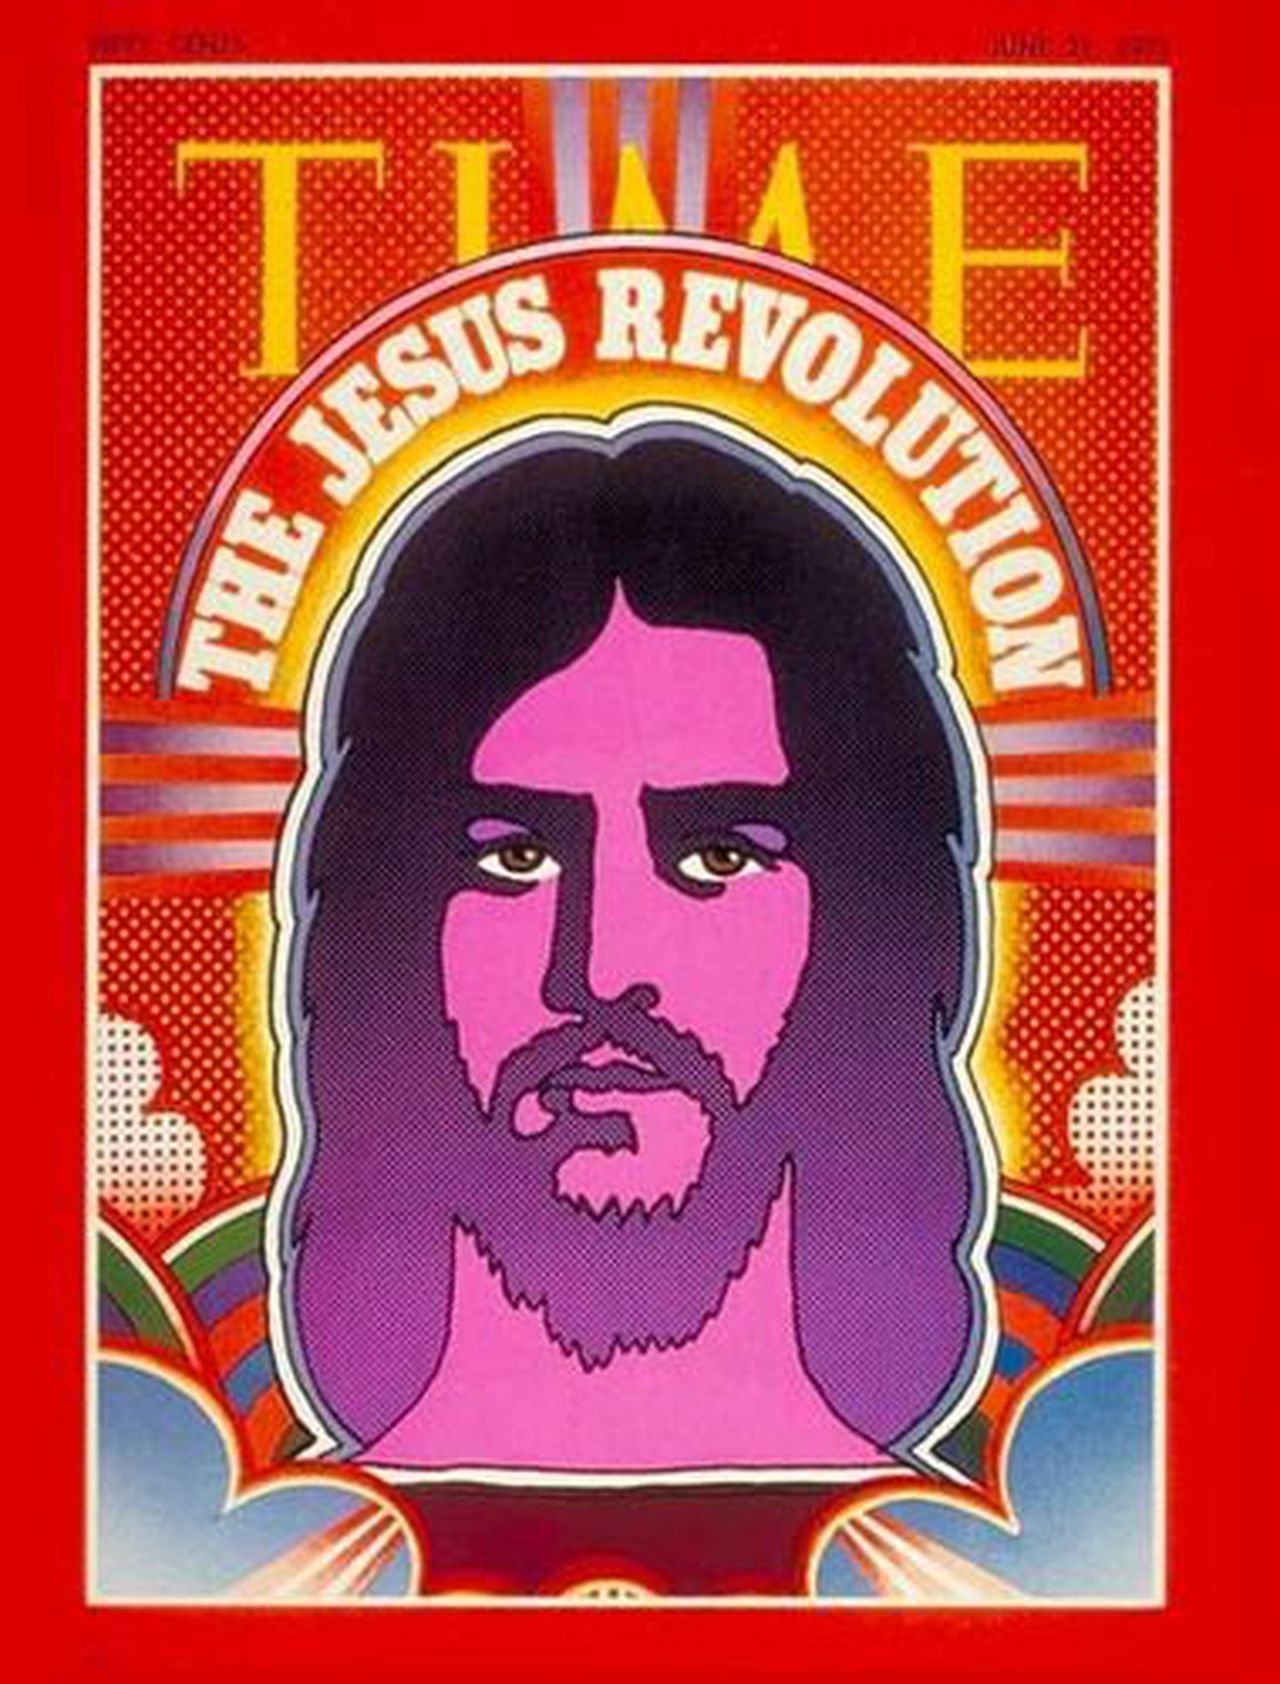 The Jesus Revolution: Erwin Brothers Plan Film On Religious Movement Of The 1960s 70s